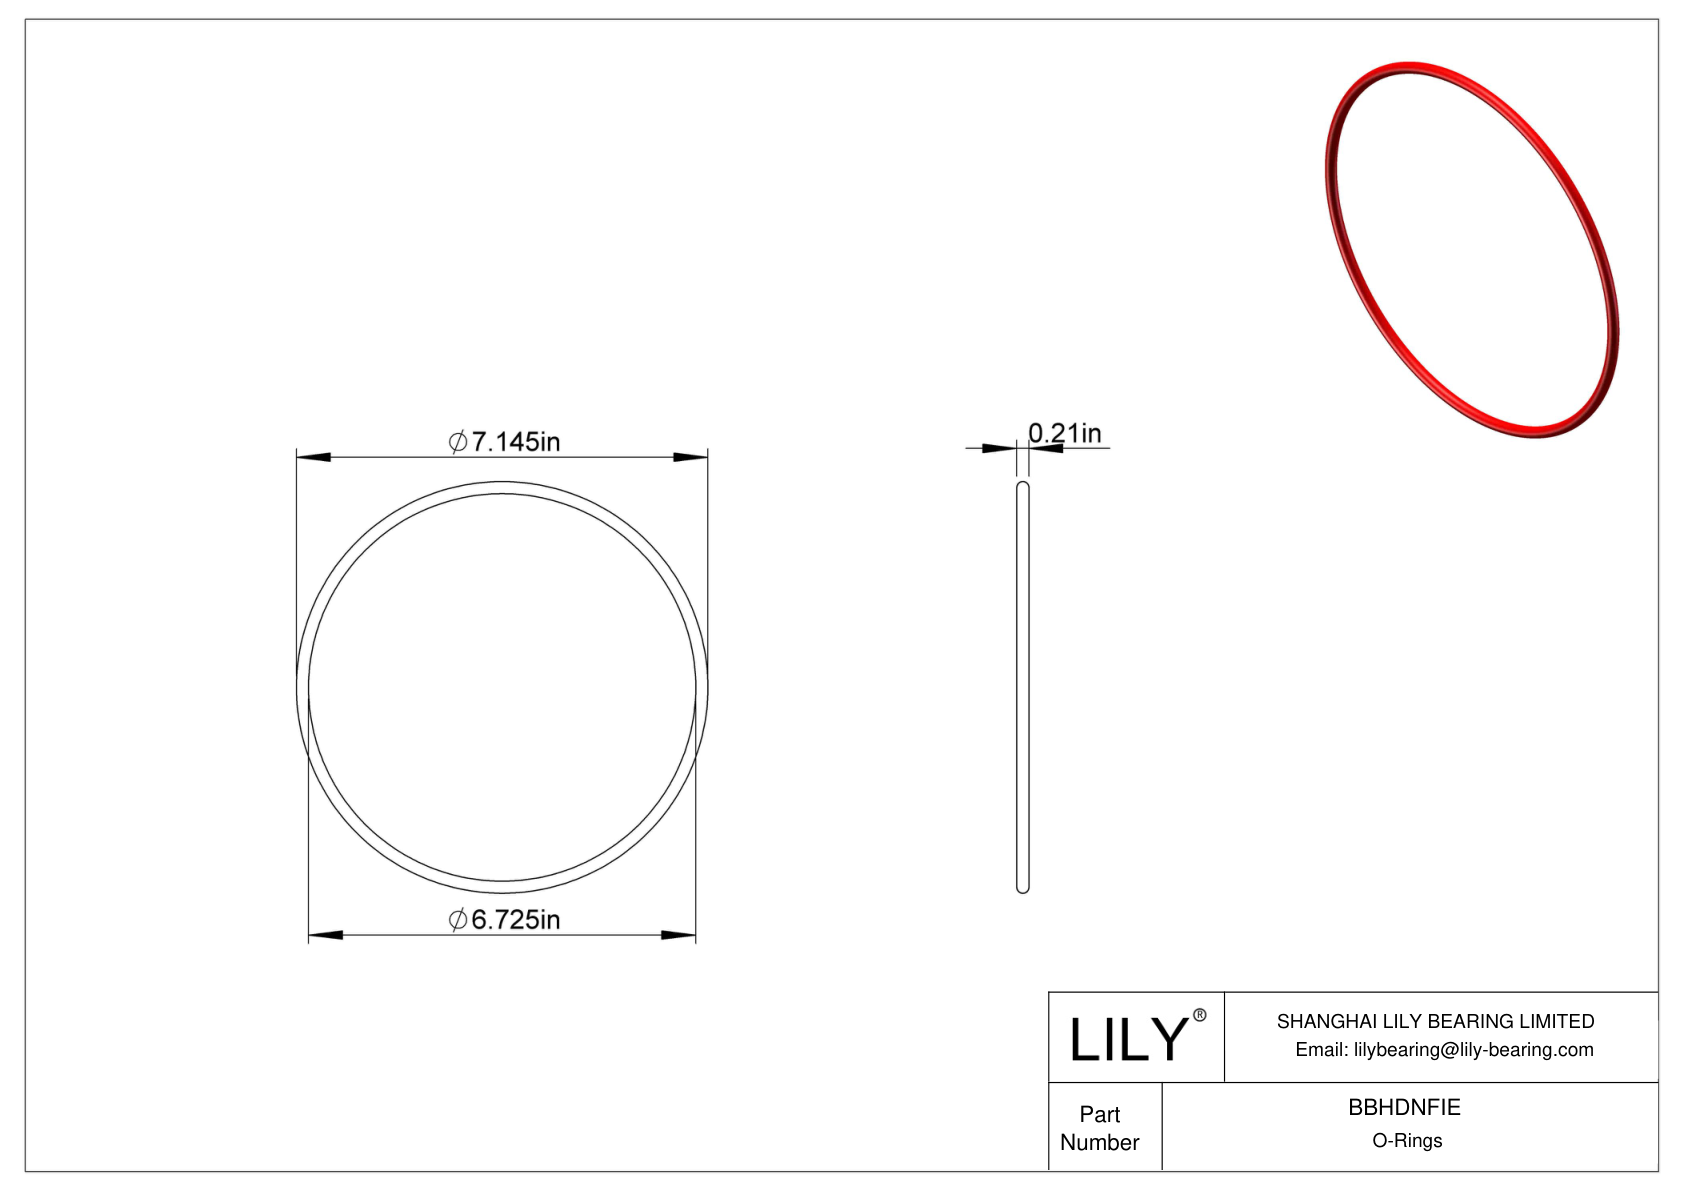 BBHDNFIE High Temperature O-Rings Round cad drawing